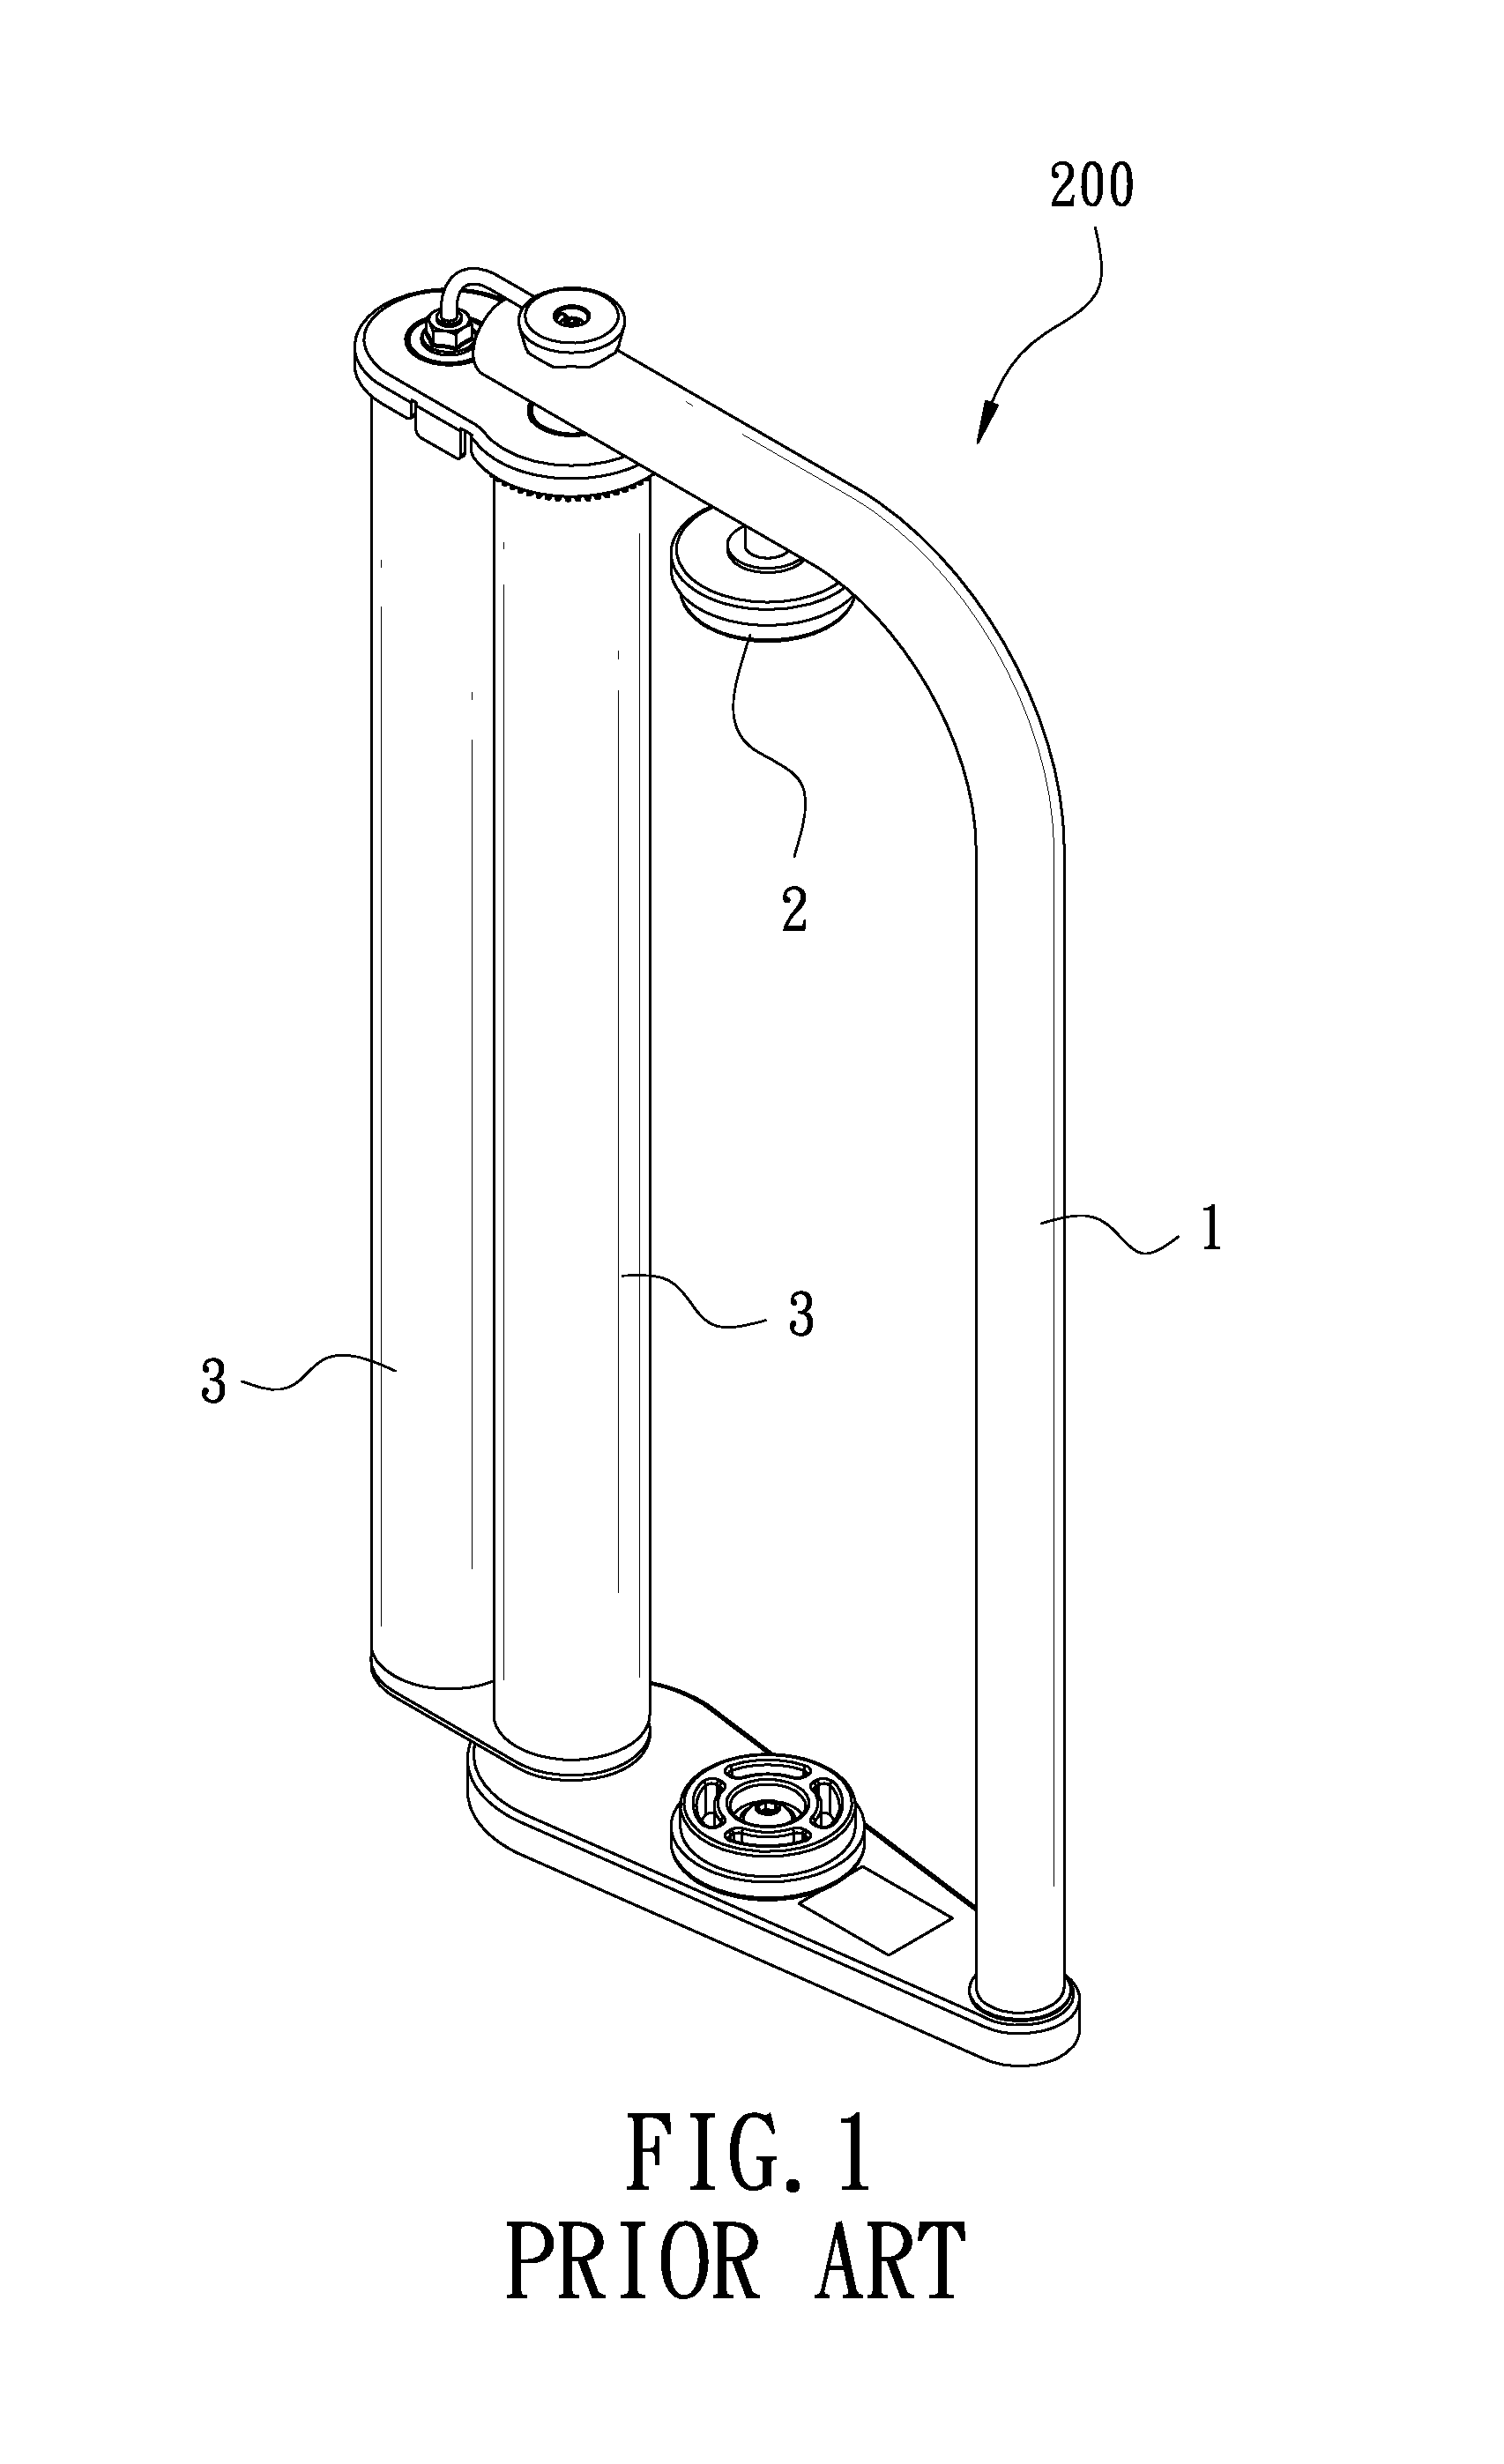 Film packing device capable of replacing gears